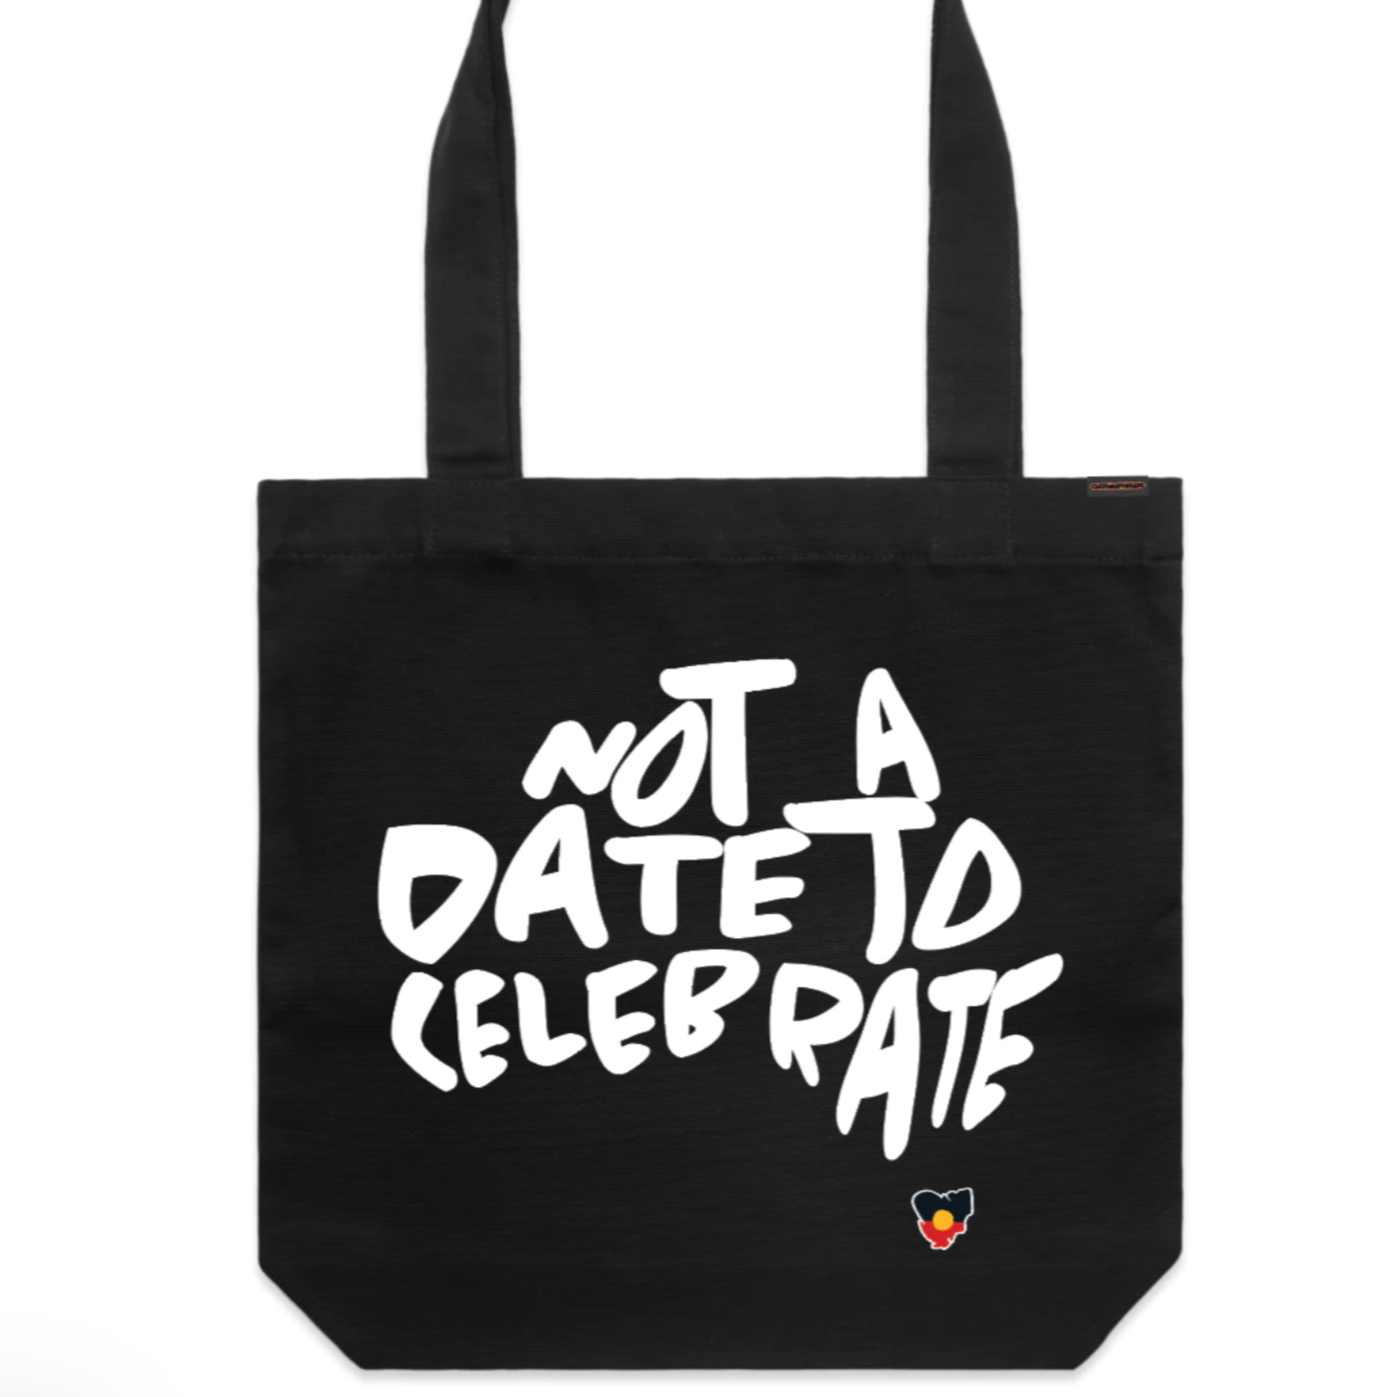 Clothing The Gaps Not a Date to Celebrate Tote Bag